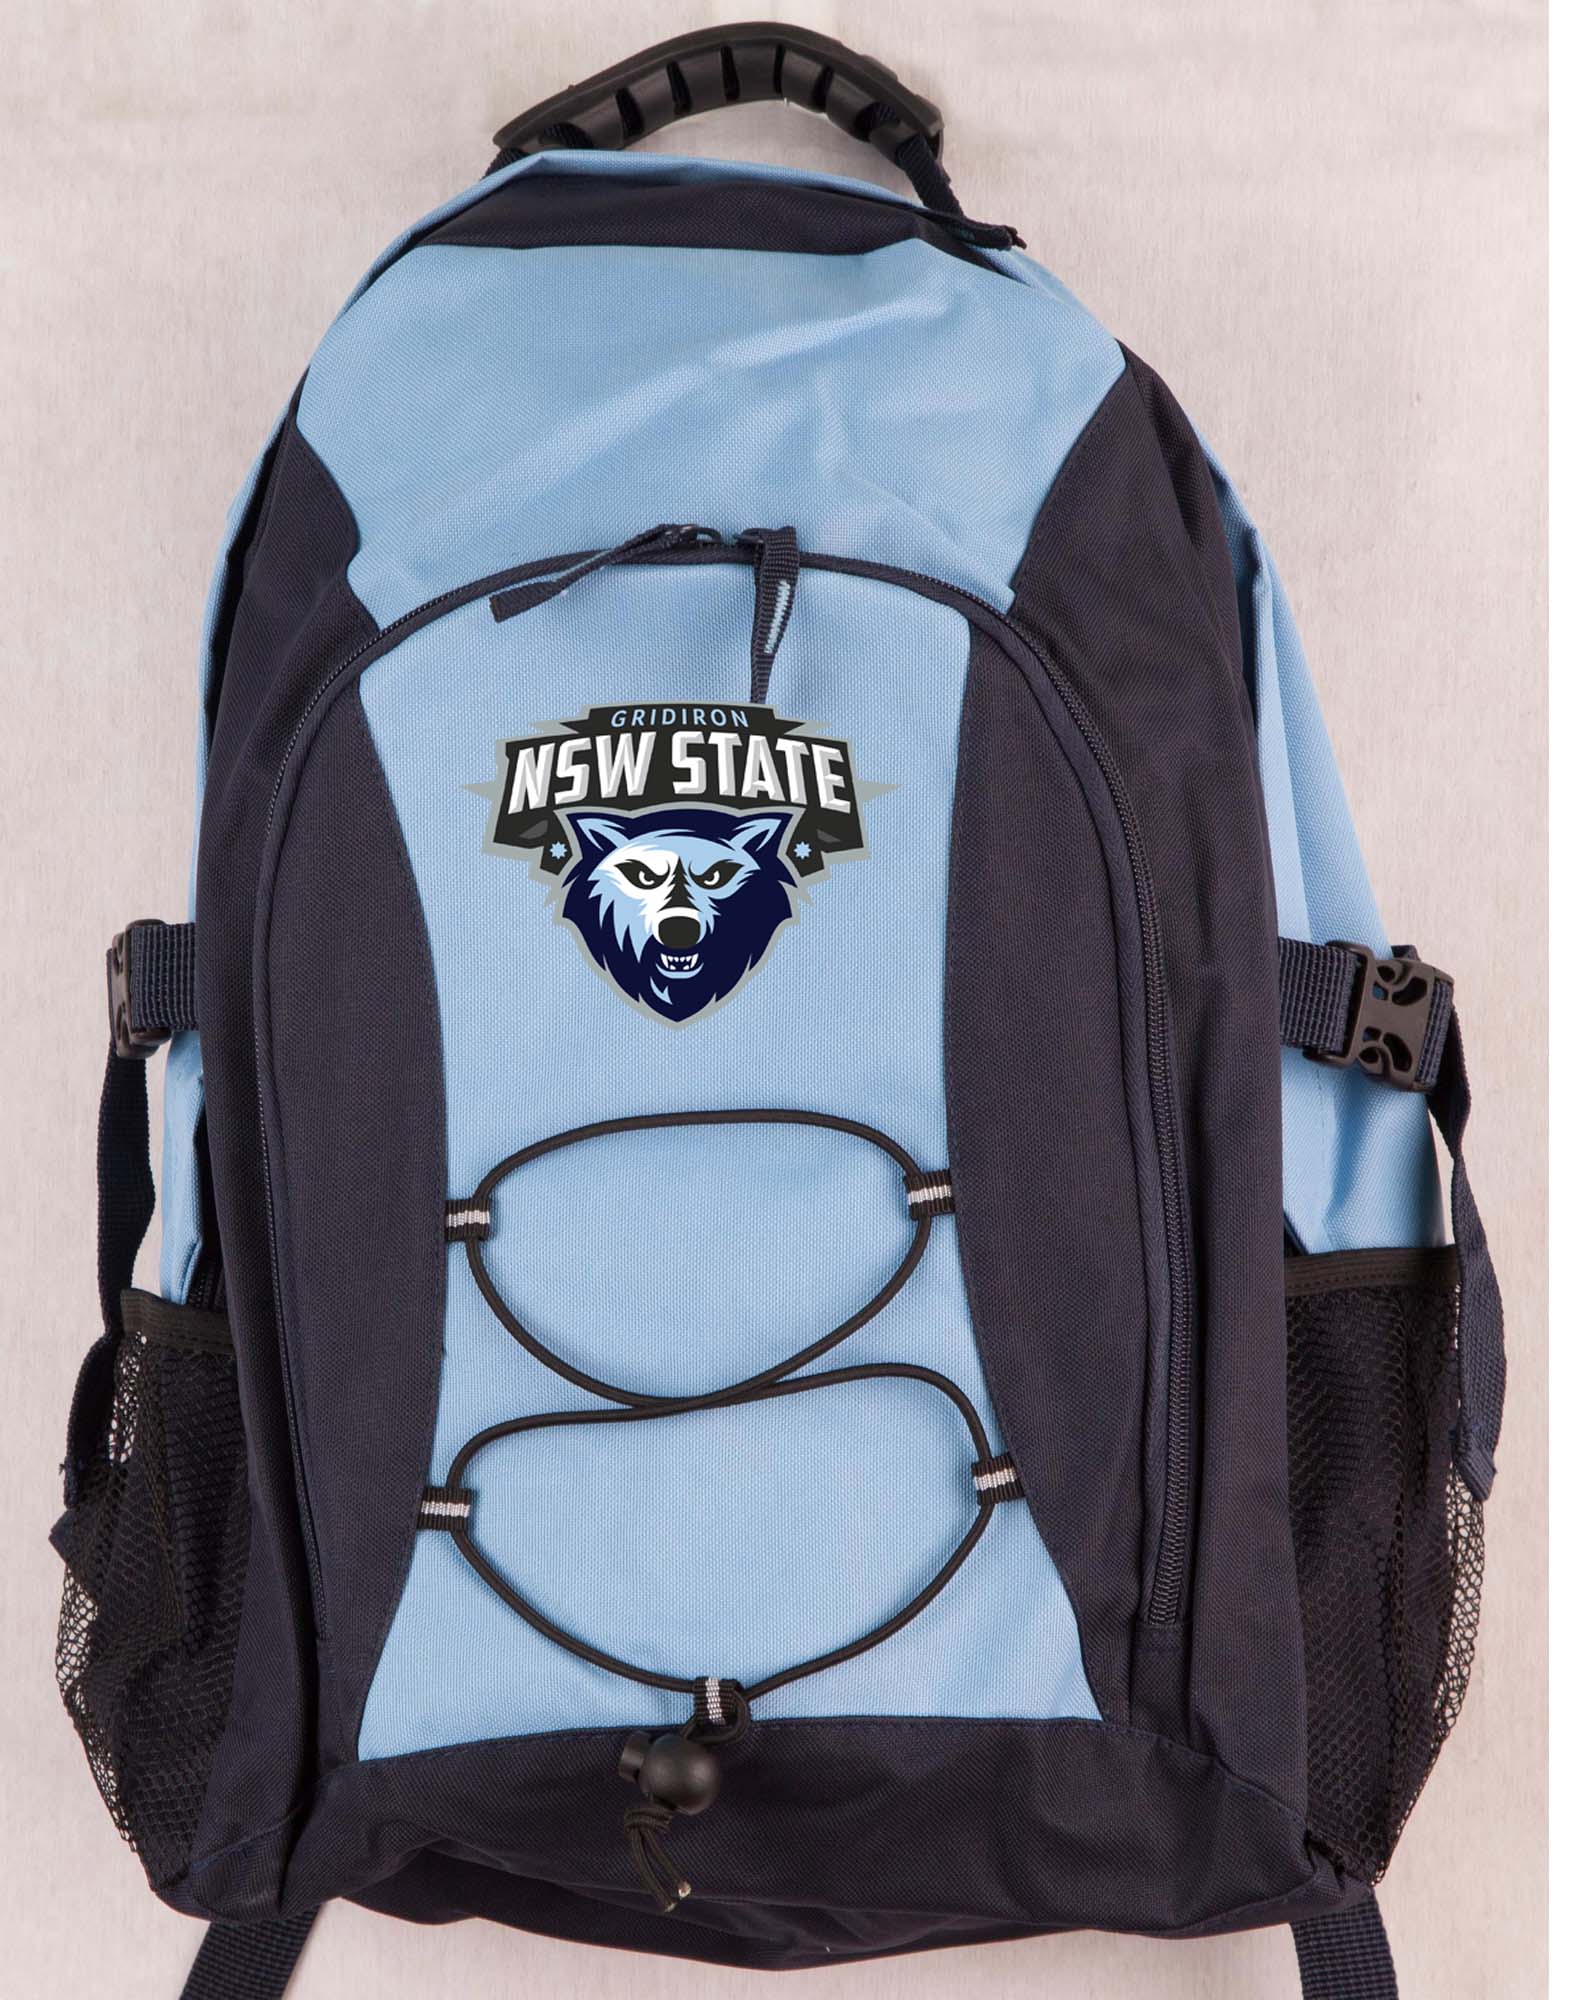 NSW smart Back Pack